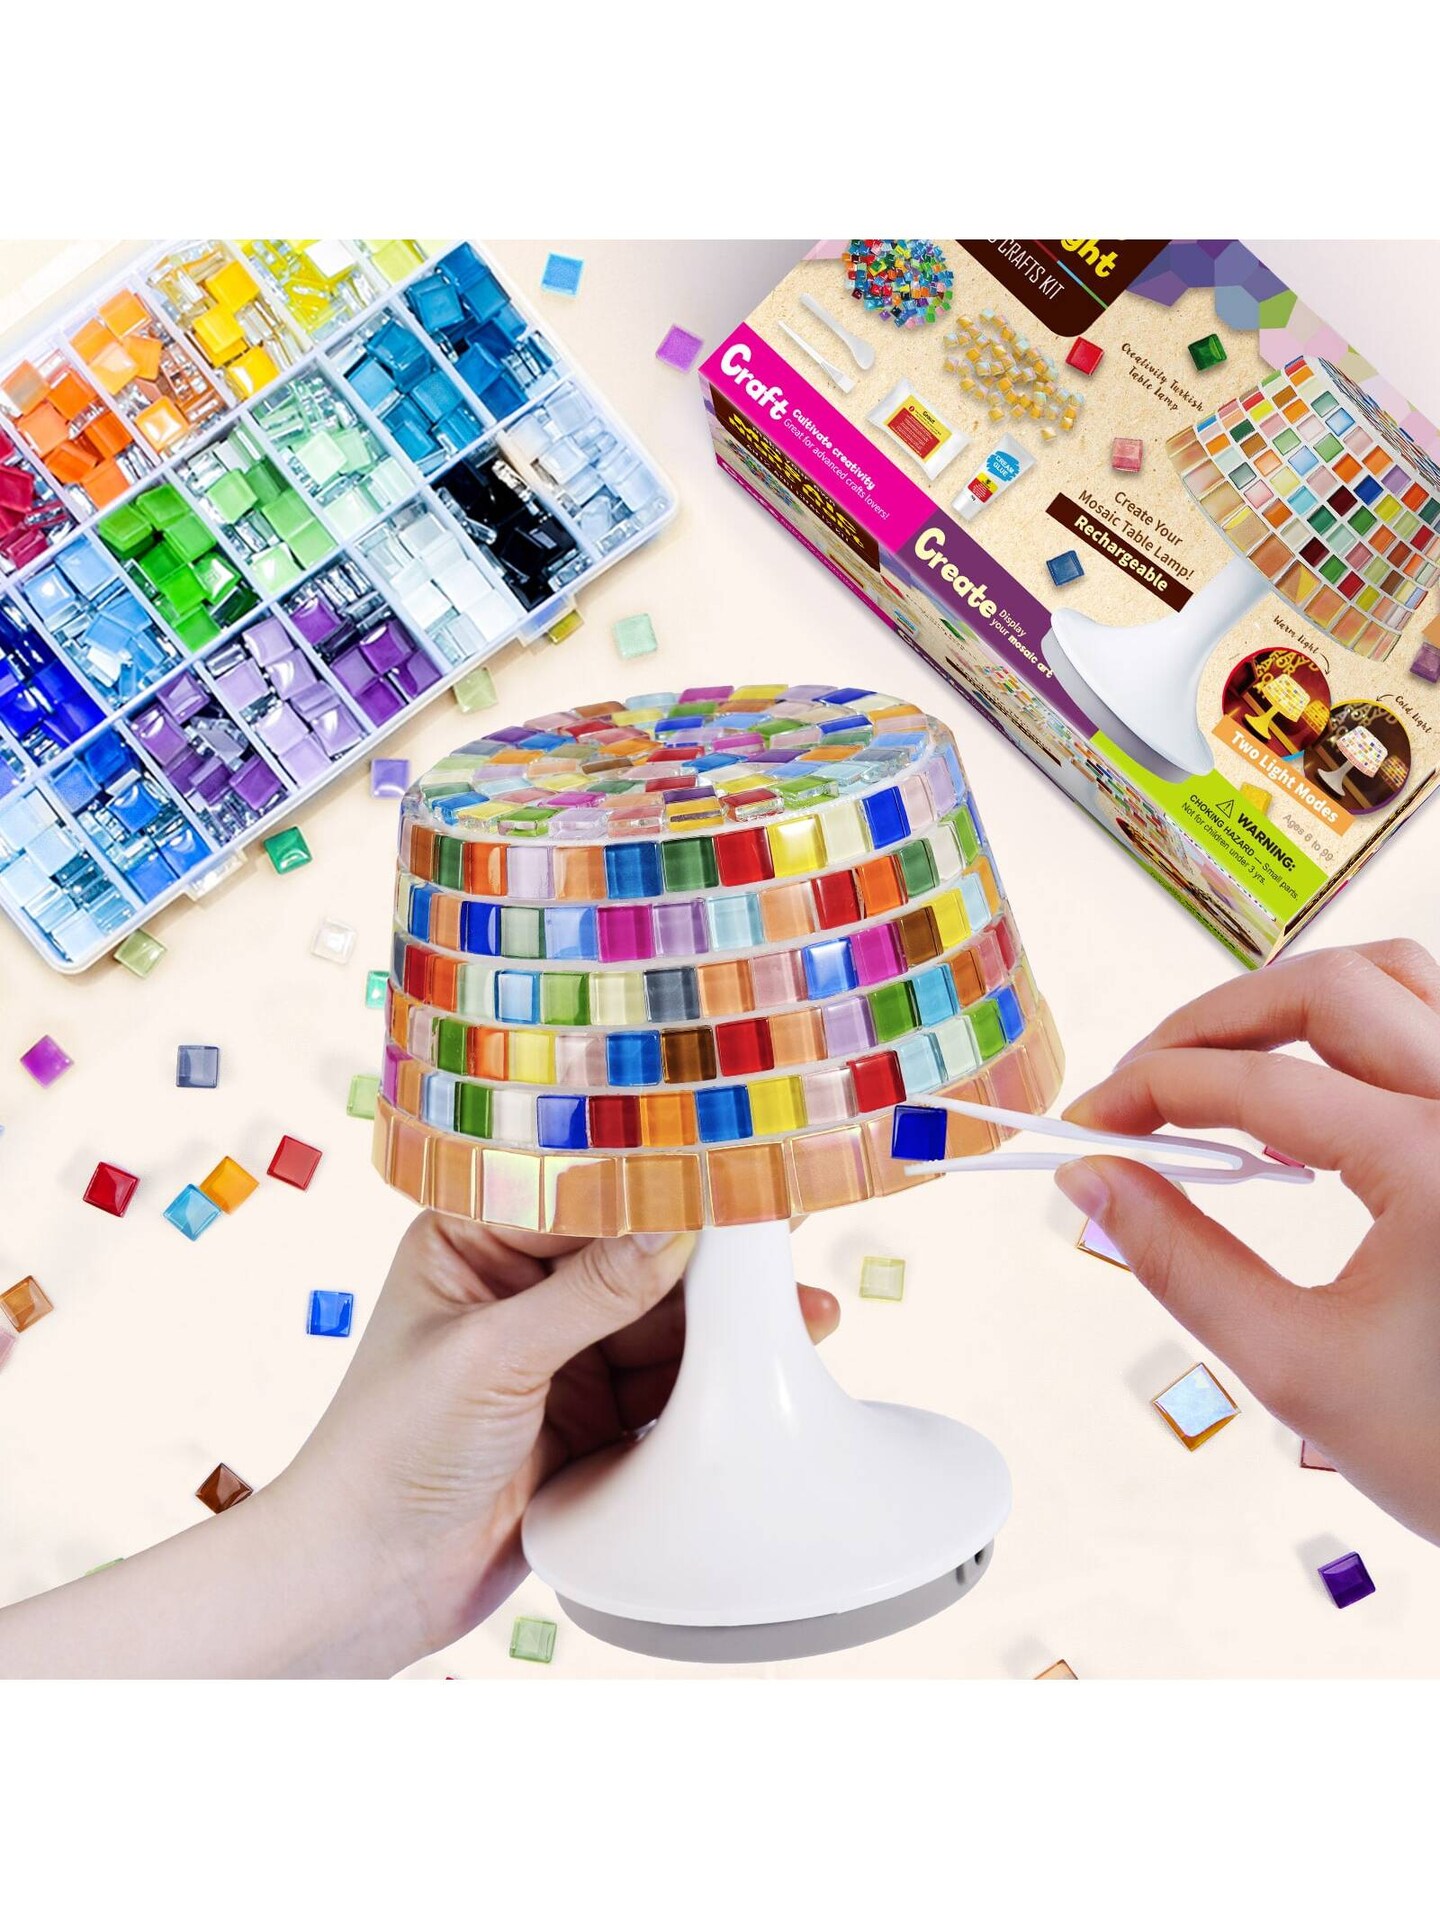 Mosaic Night Light Kit, Arts and Crafts for Kids Ages 8-12, DIY